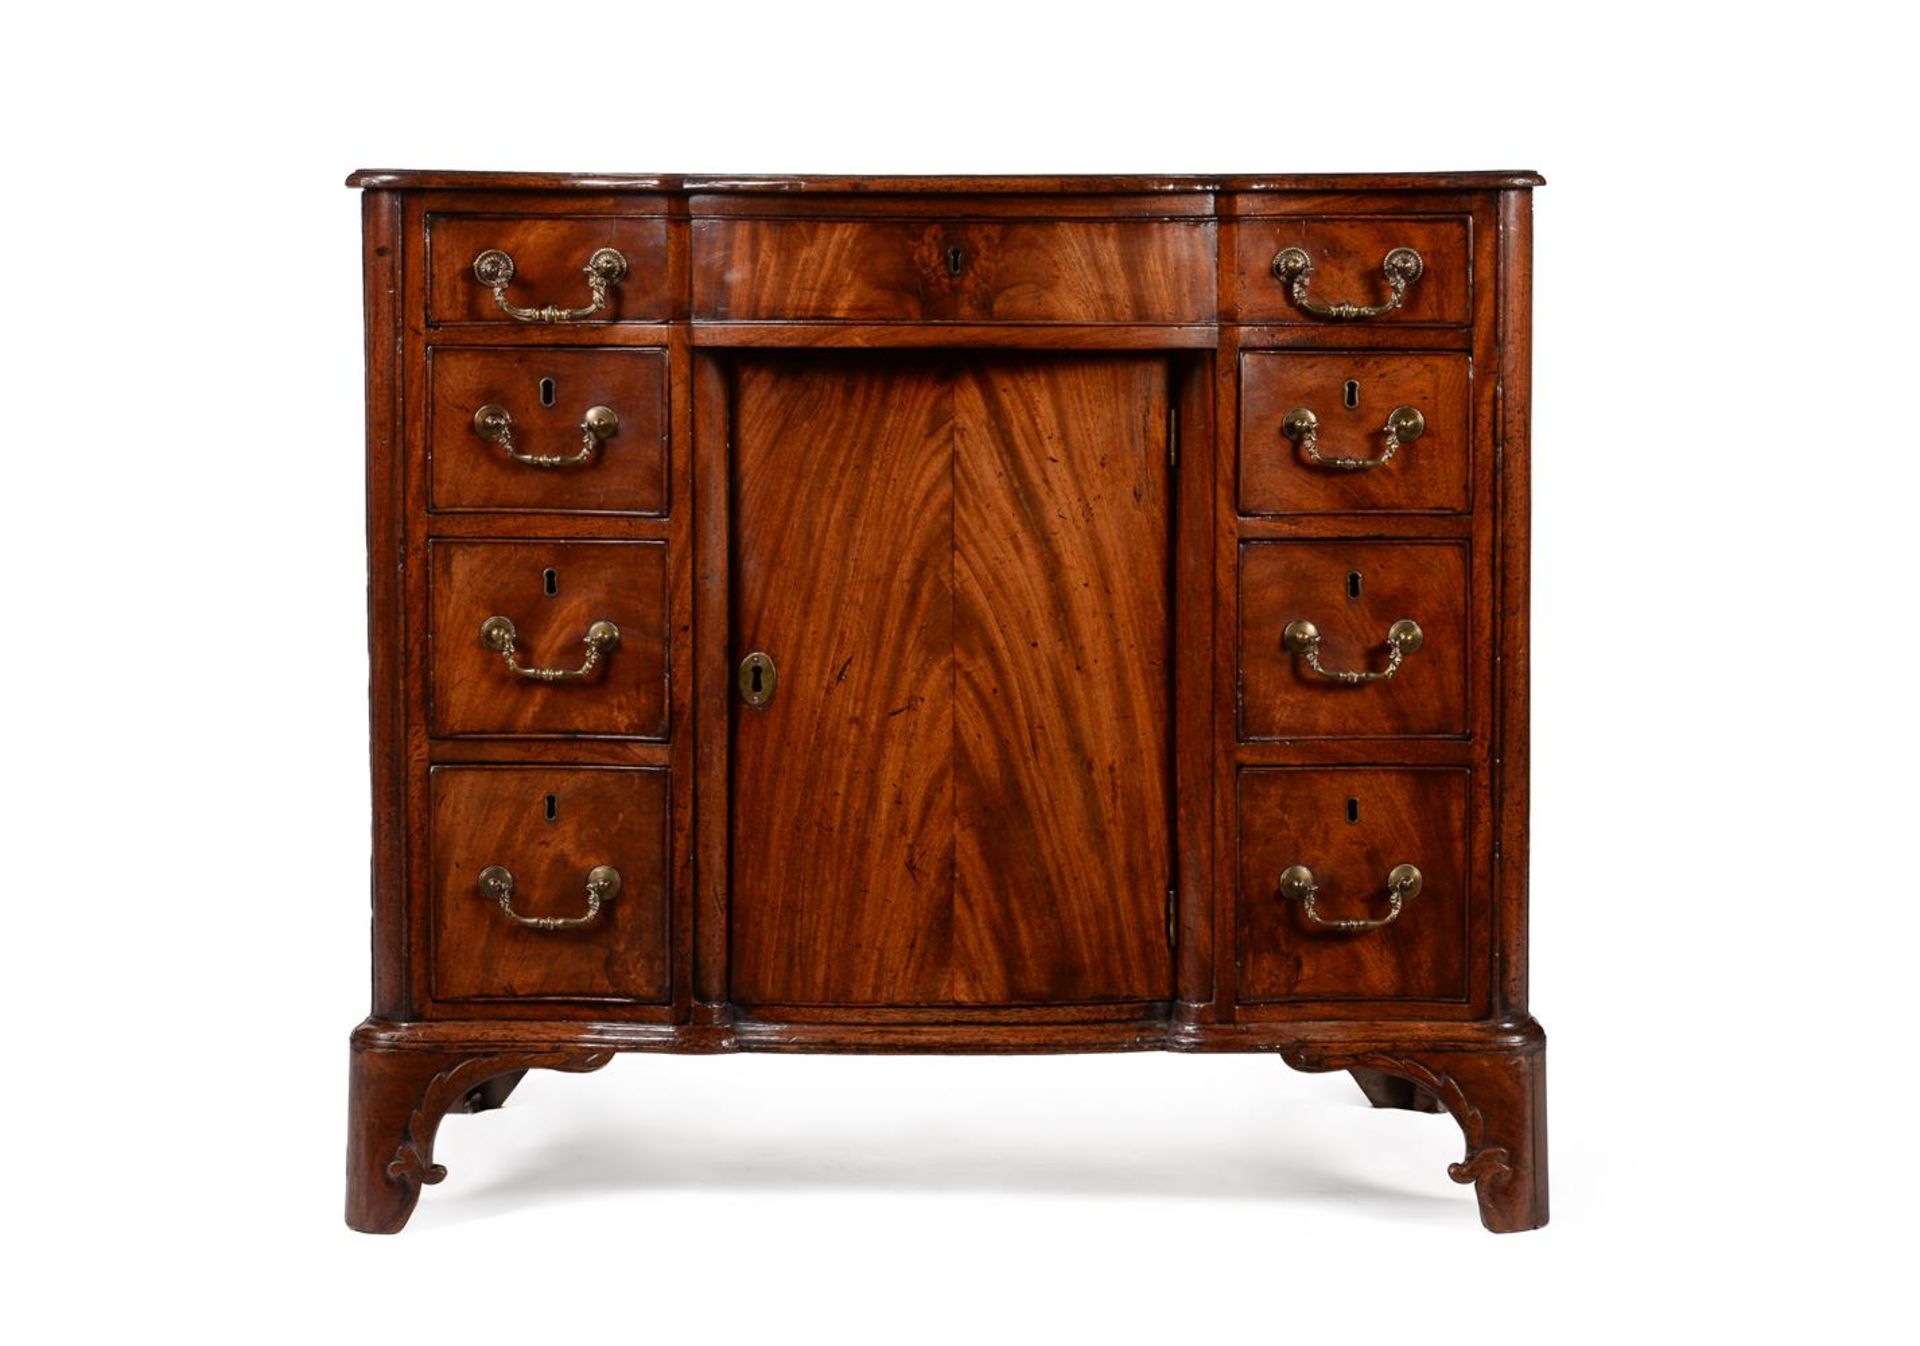 A FINE GEORGE III MAHOGANY SERPENTINE FRONTED COMMODE, IN THE MANNER OF WRIGHT & ELWICK, CIRCA 1770 - Image 2 of 6